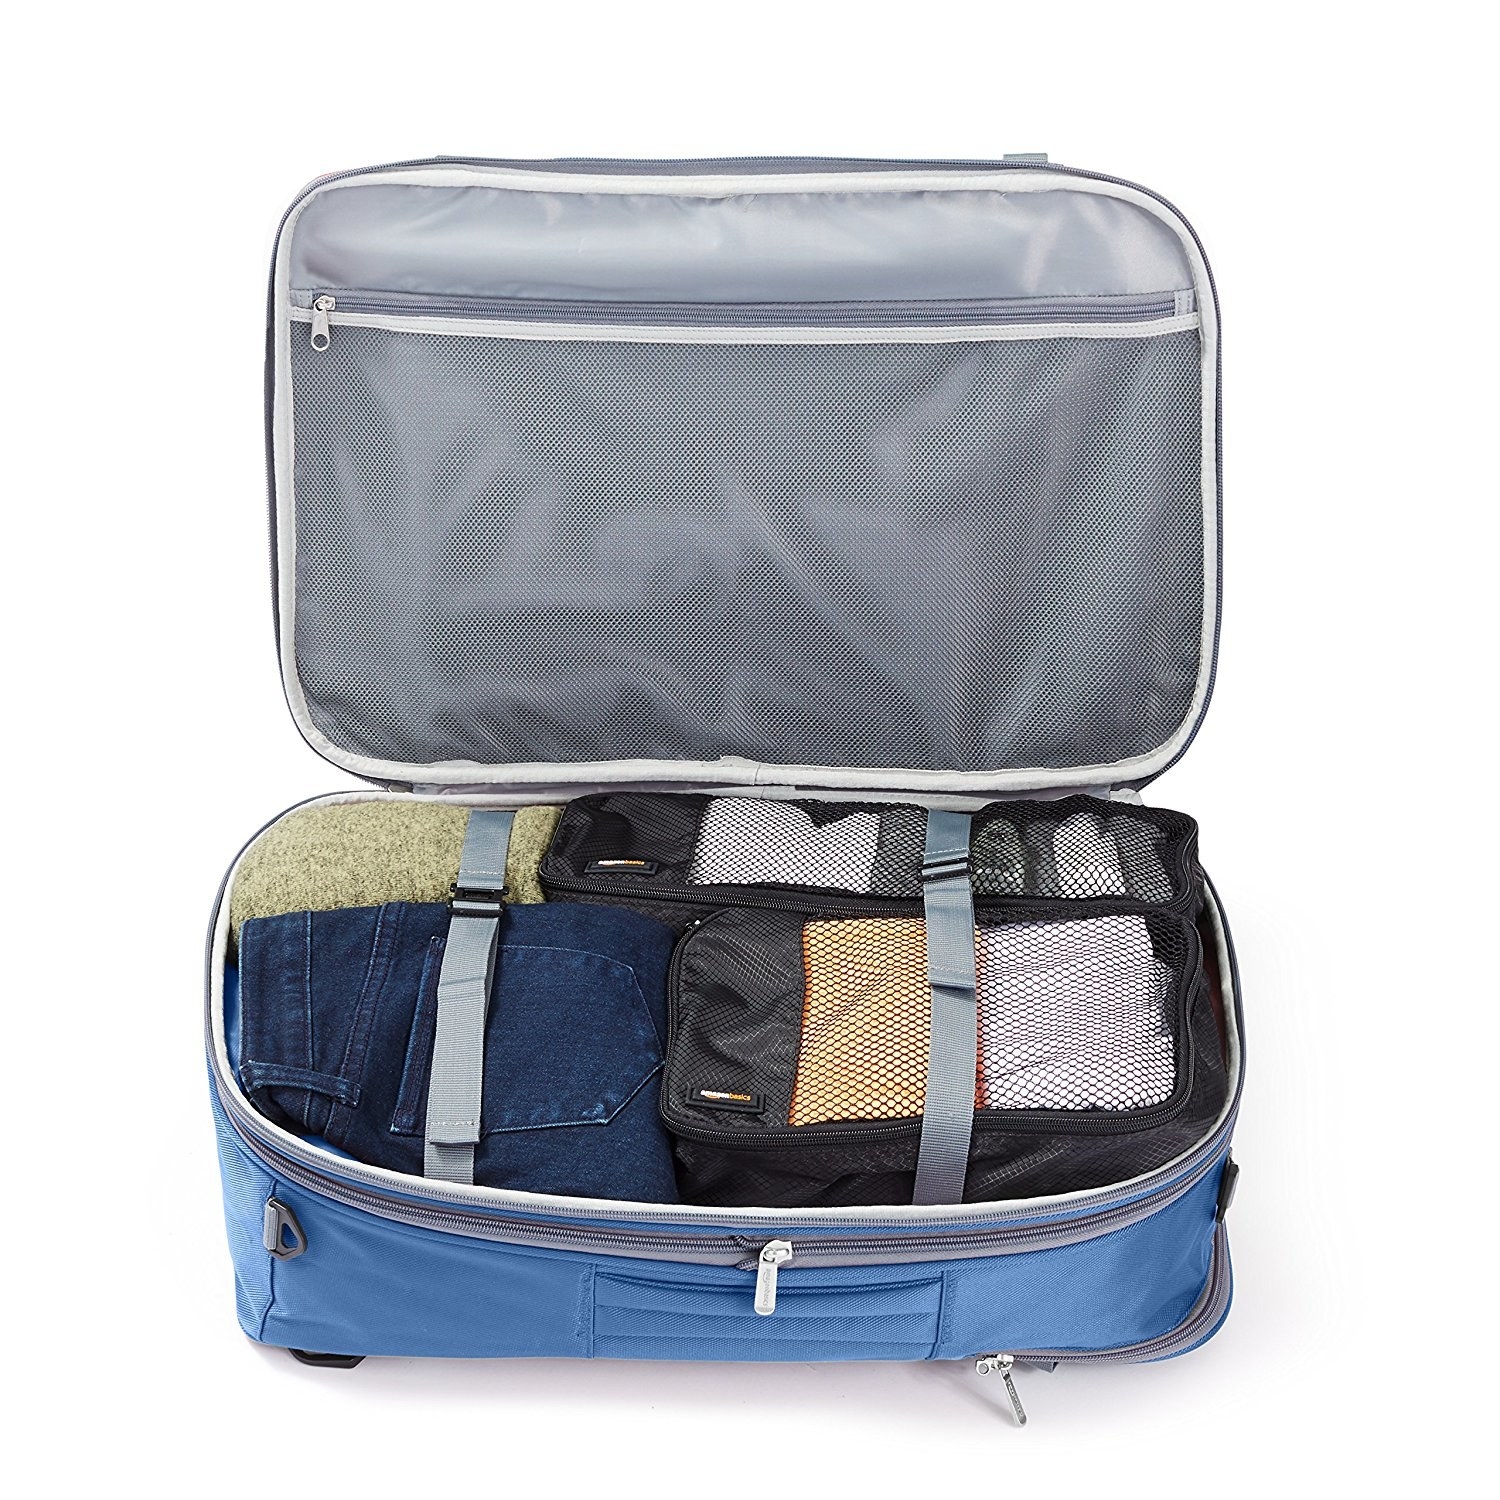 A Guide To Carry-On Luggage For 24 Major Airlines (And Our Favorite Bags)